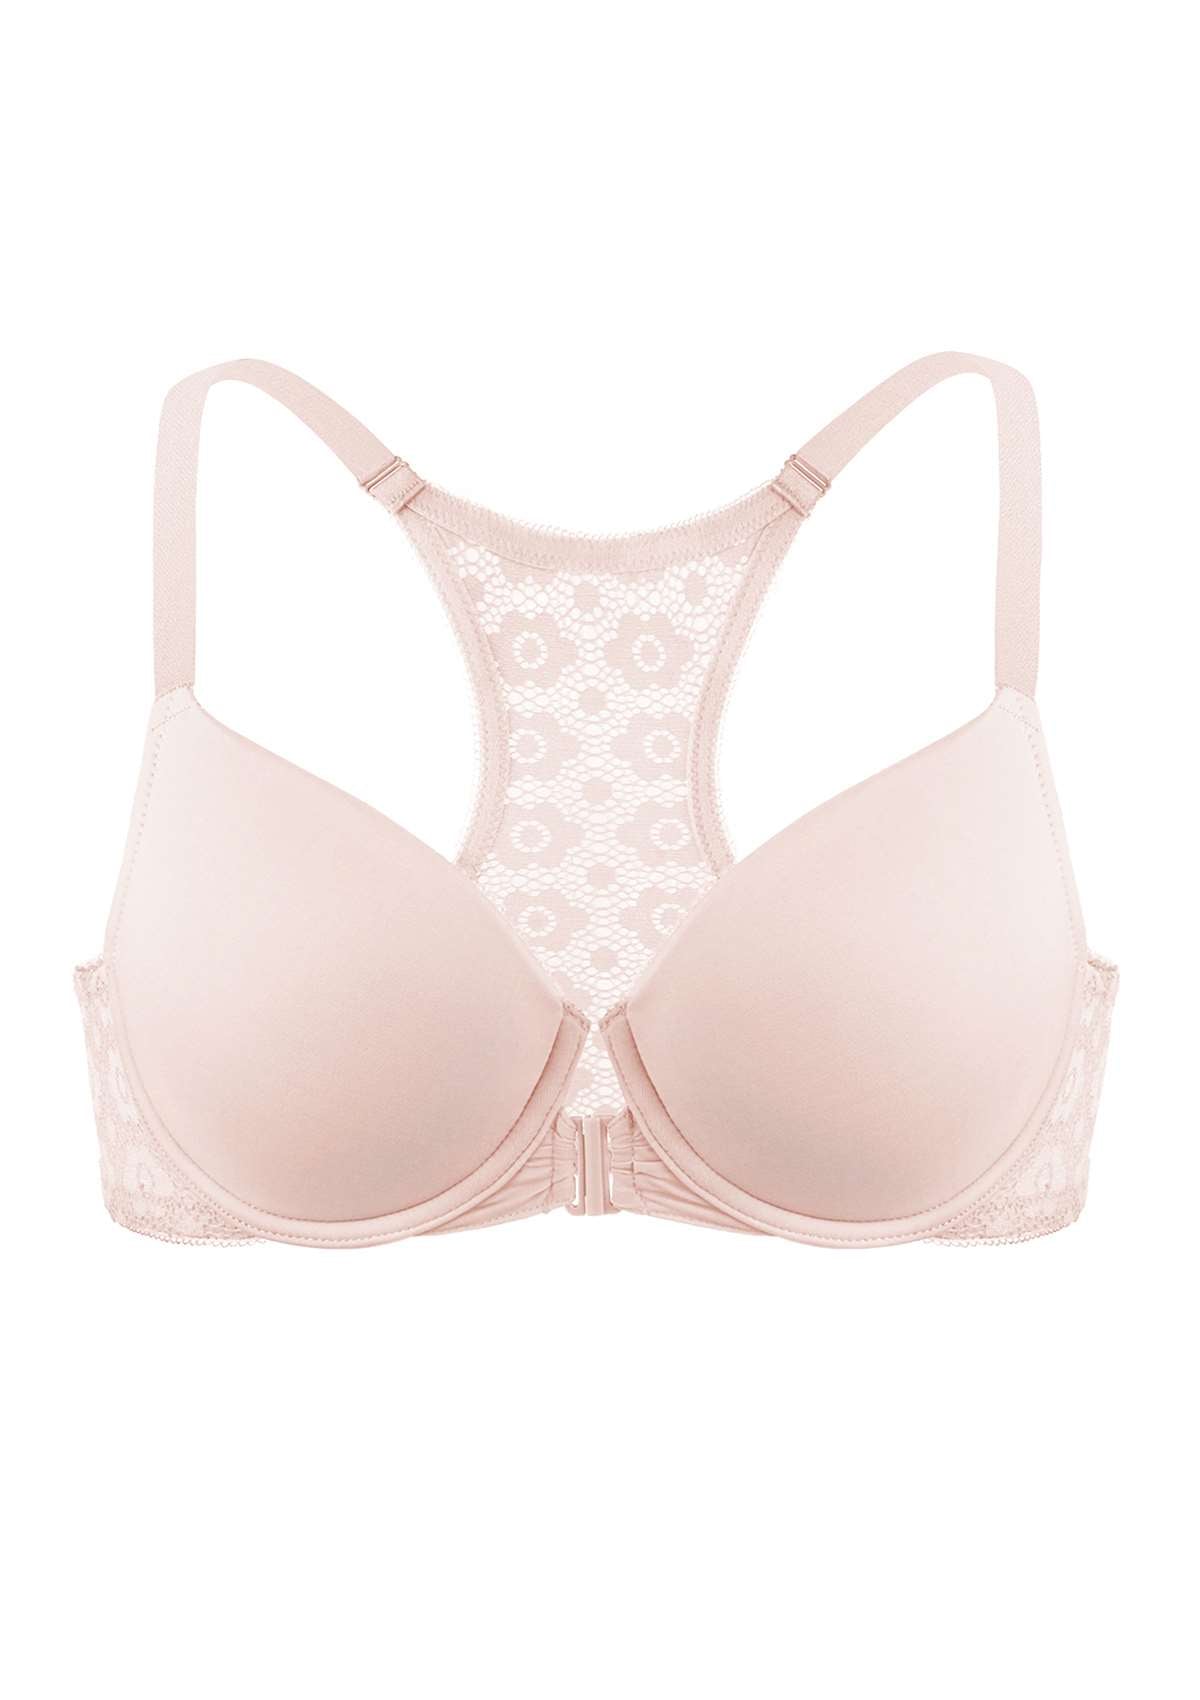 HSIA Serena Front-Close Lace Racerback Underwire Bra For Back Support - Pink / 36 / DDD/F